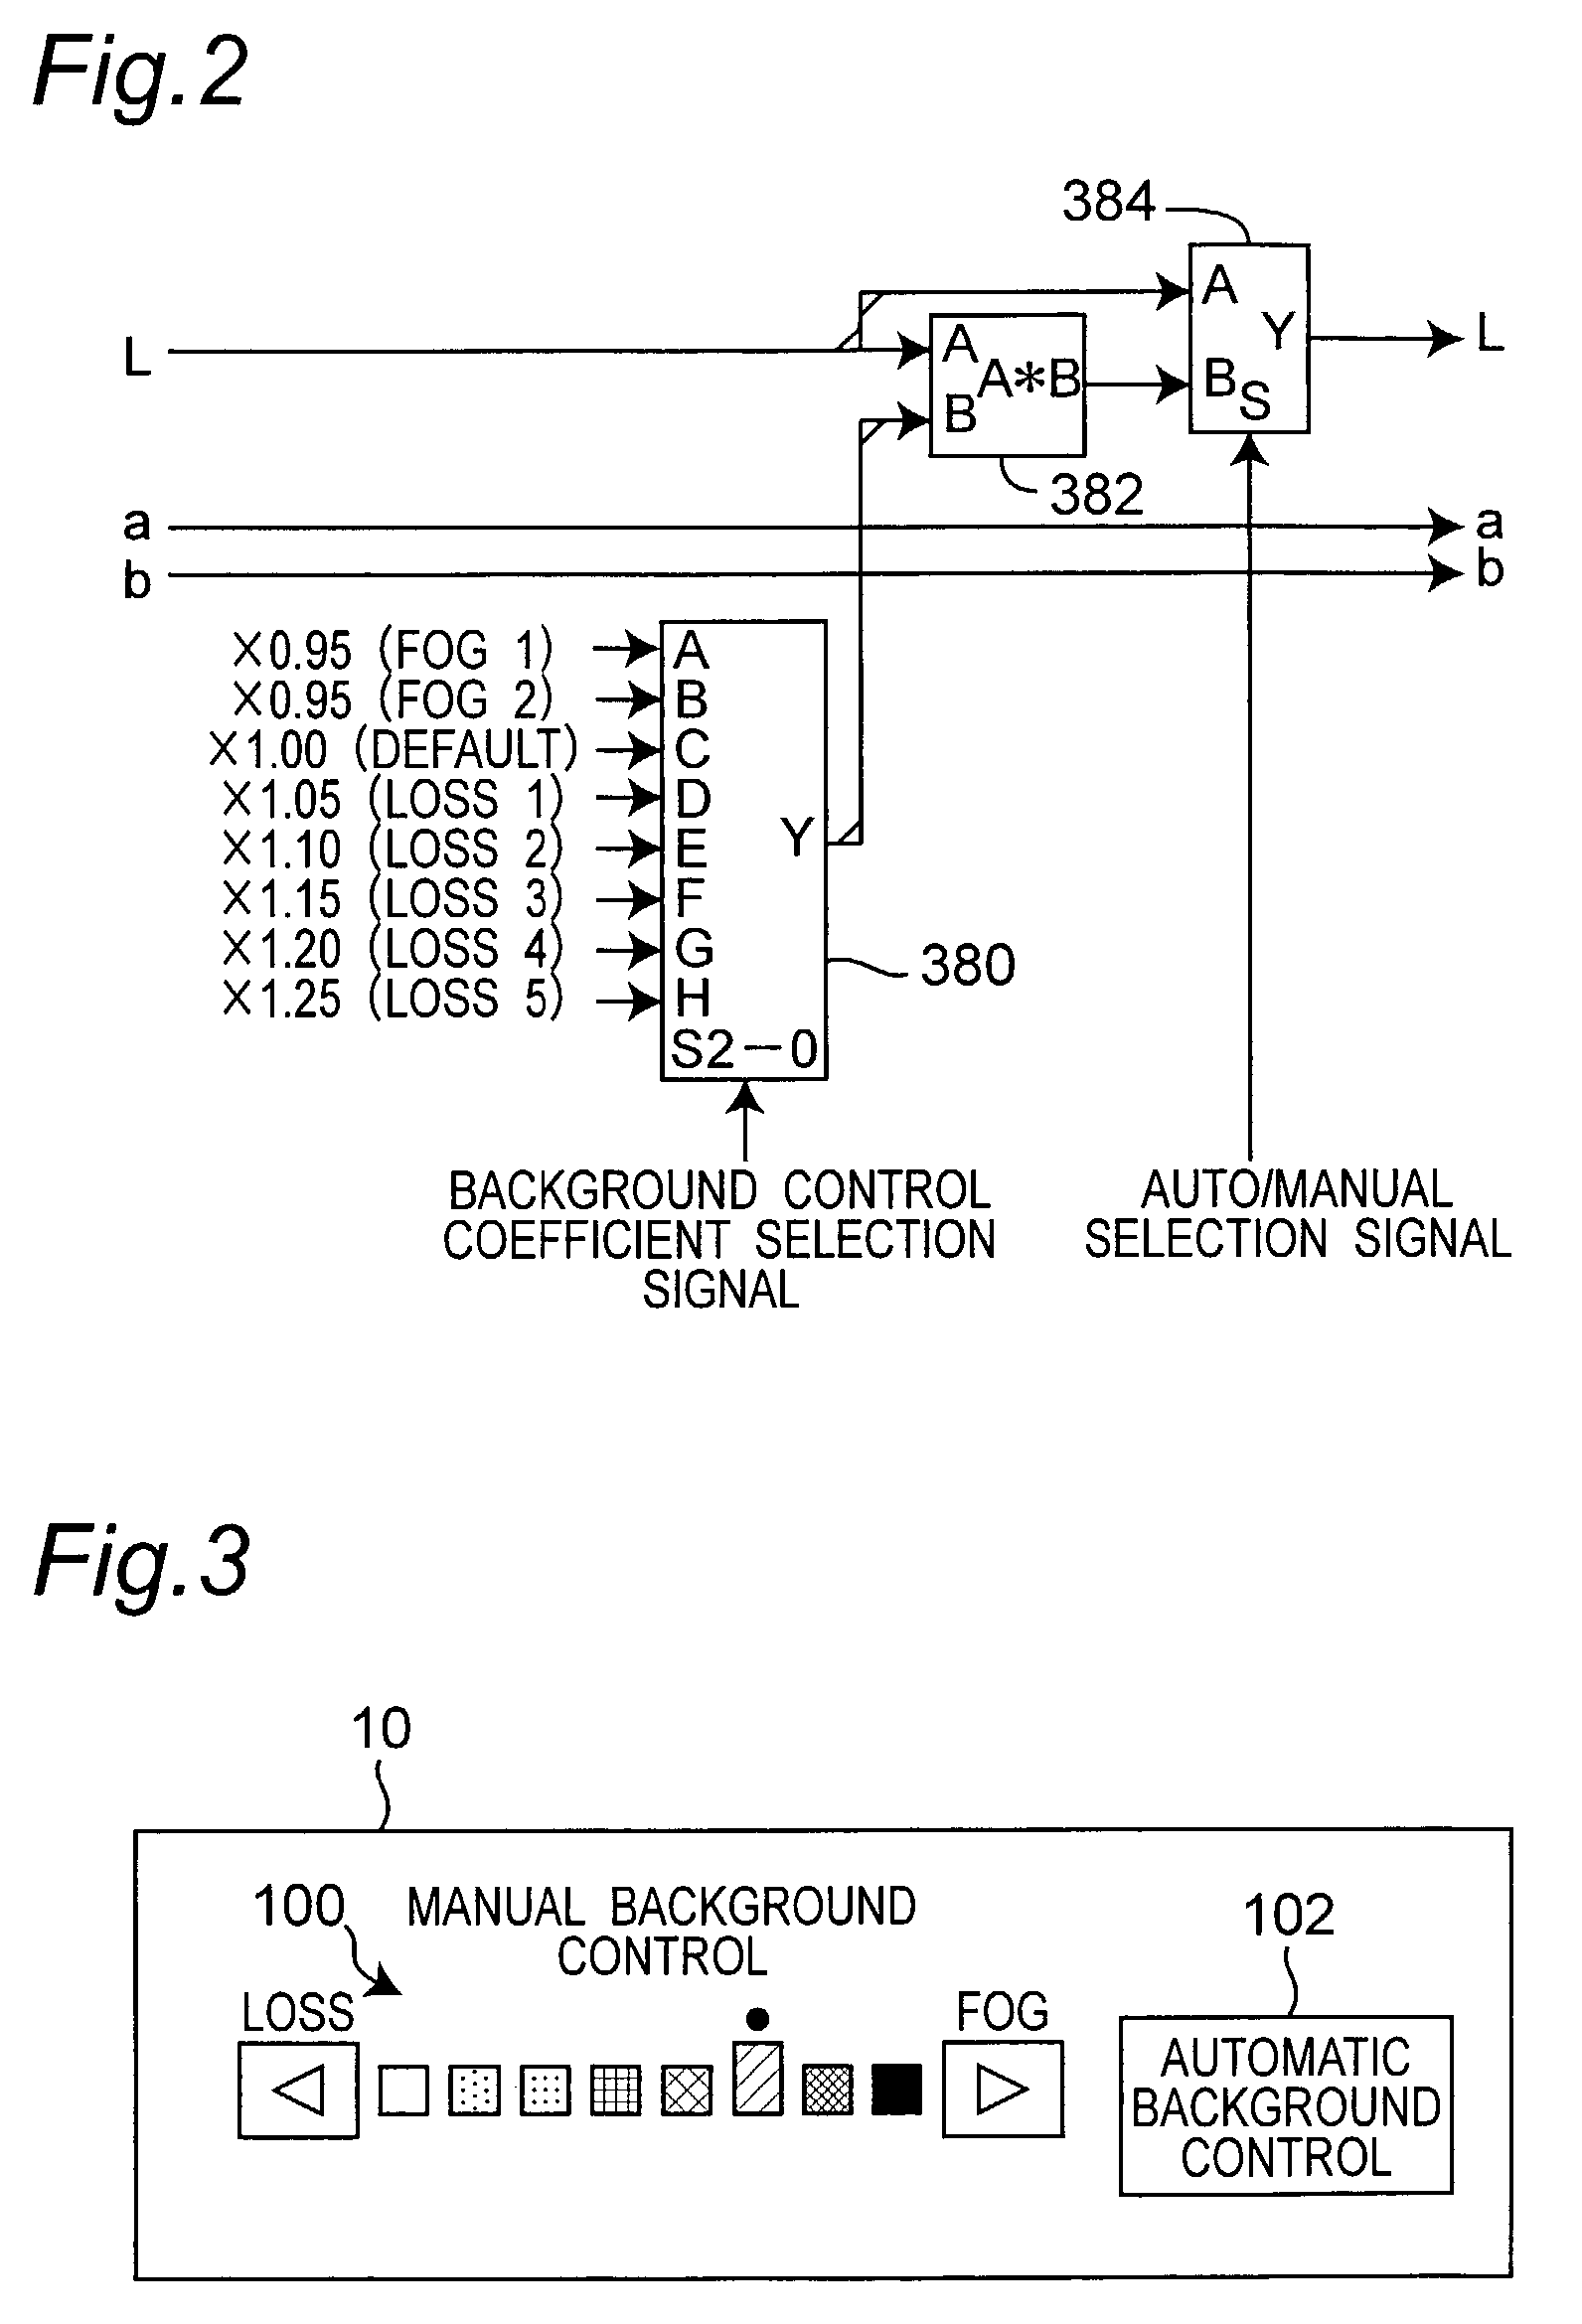 Color image processing apparatus with background control